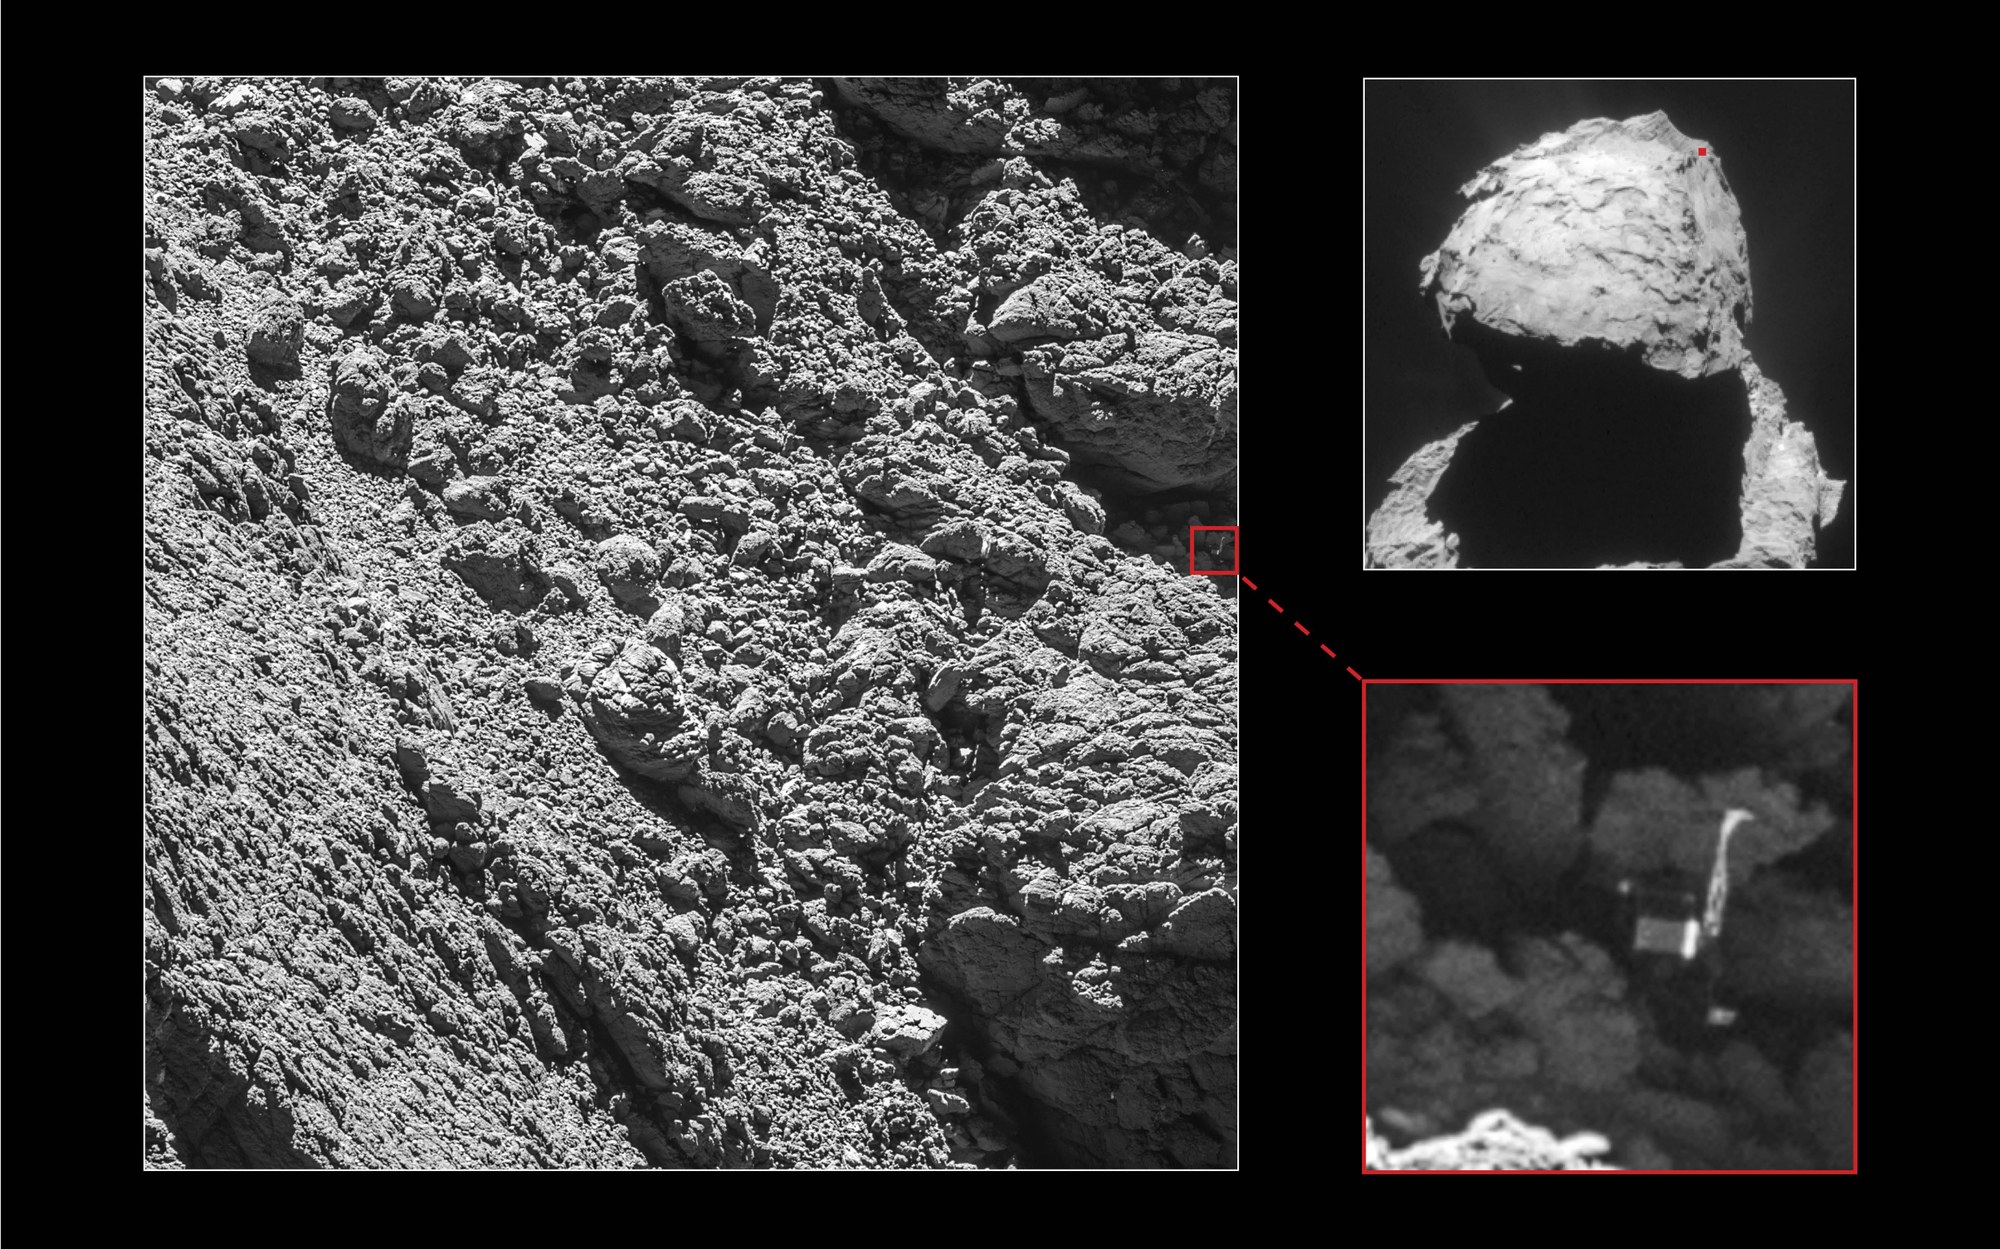 From time to time, the Rosetta orbiter was manoeuvred to within two kilometres of the comet in preparation for the end of the mission